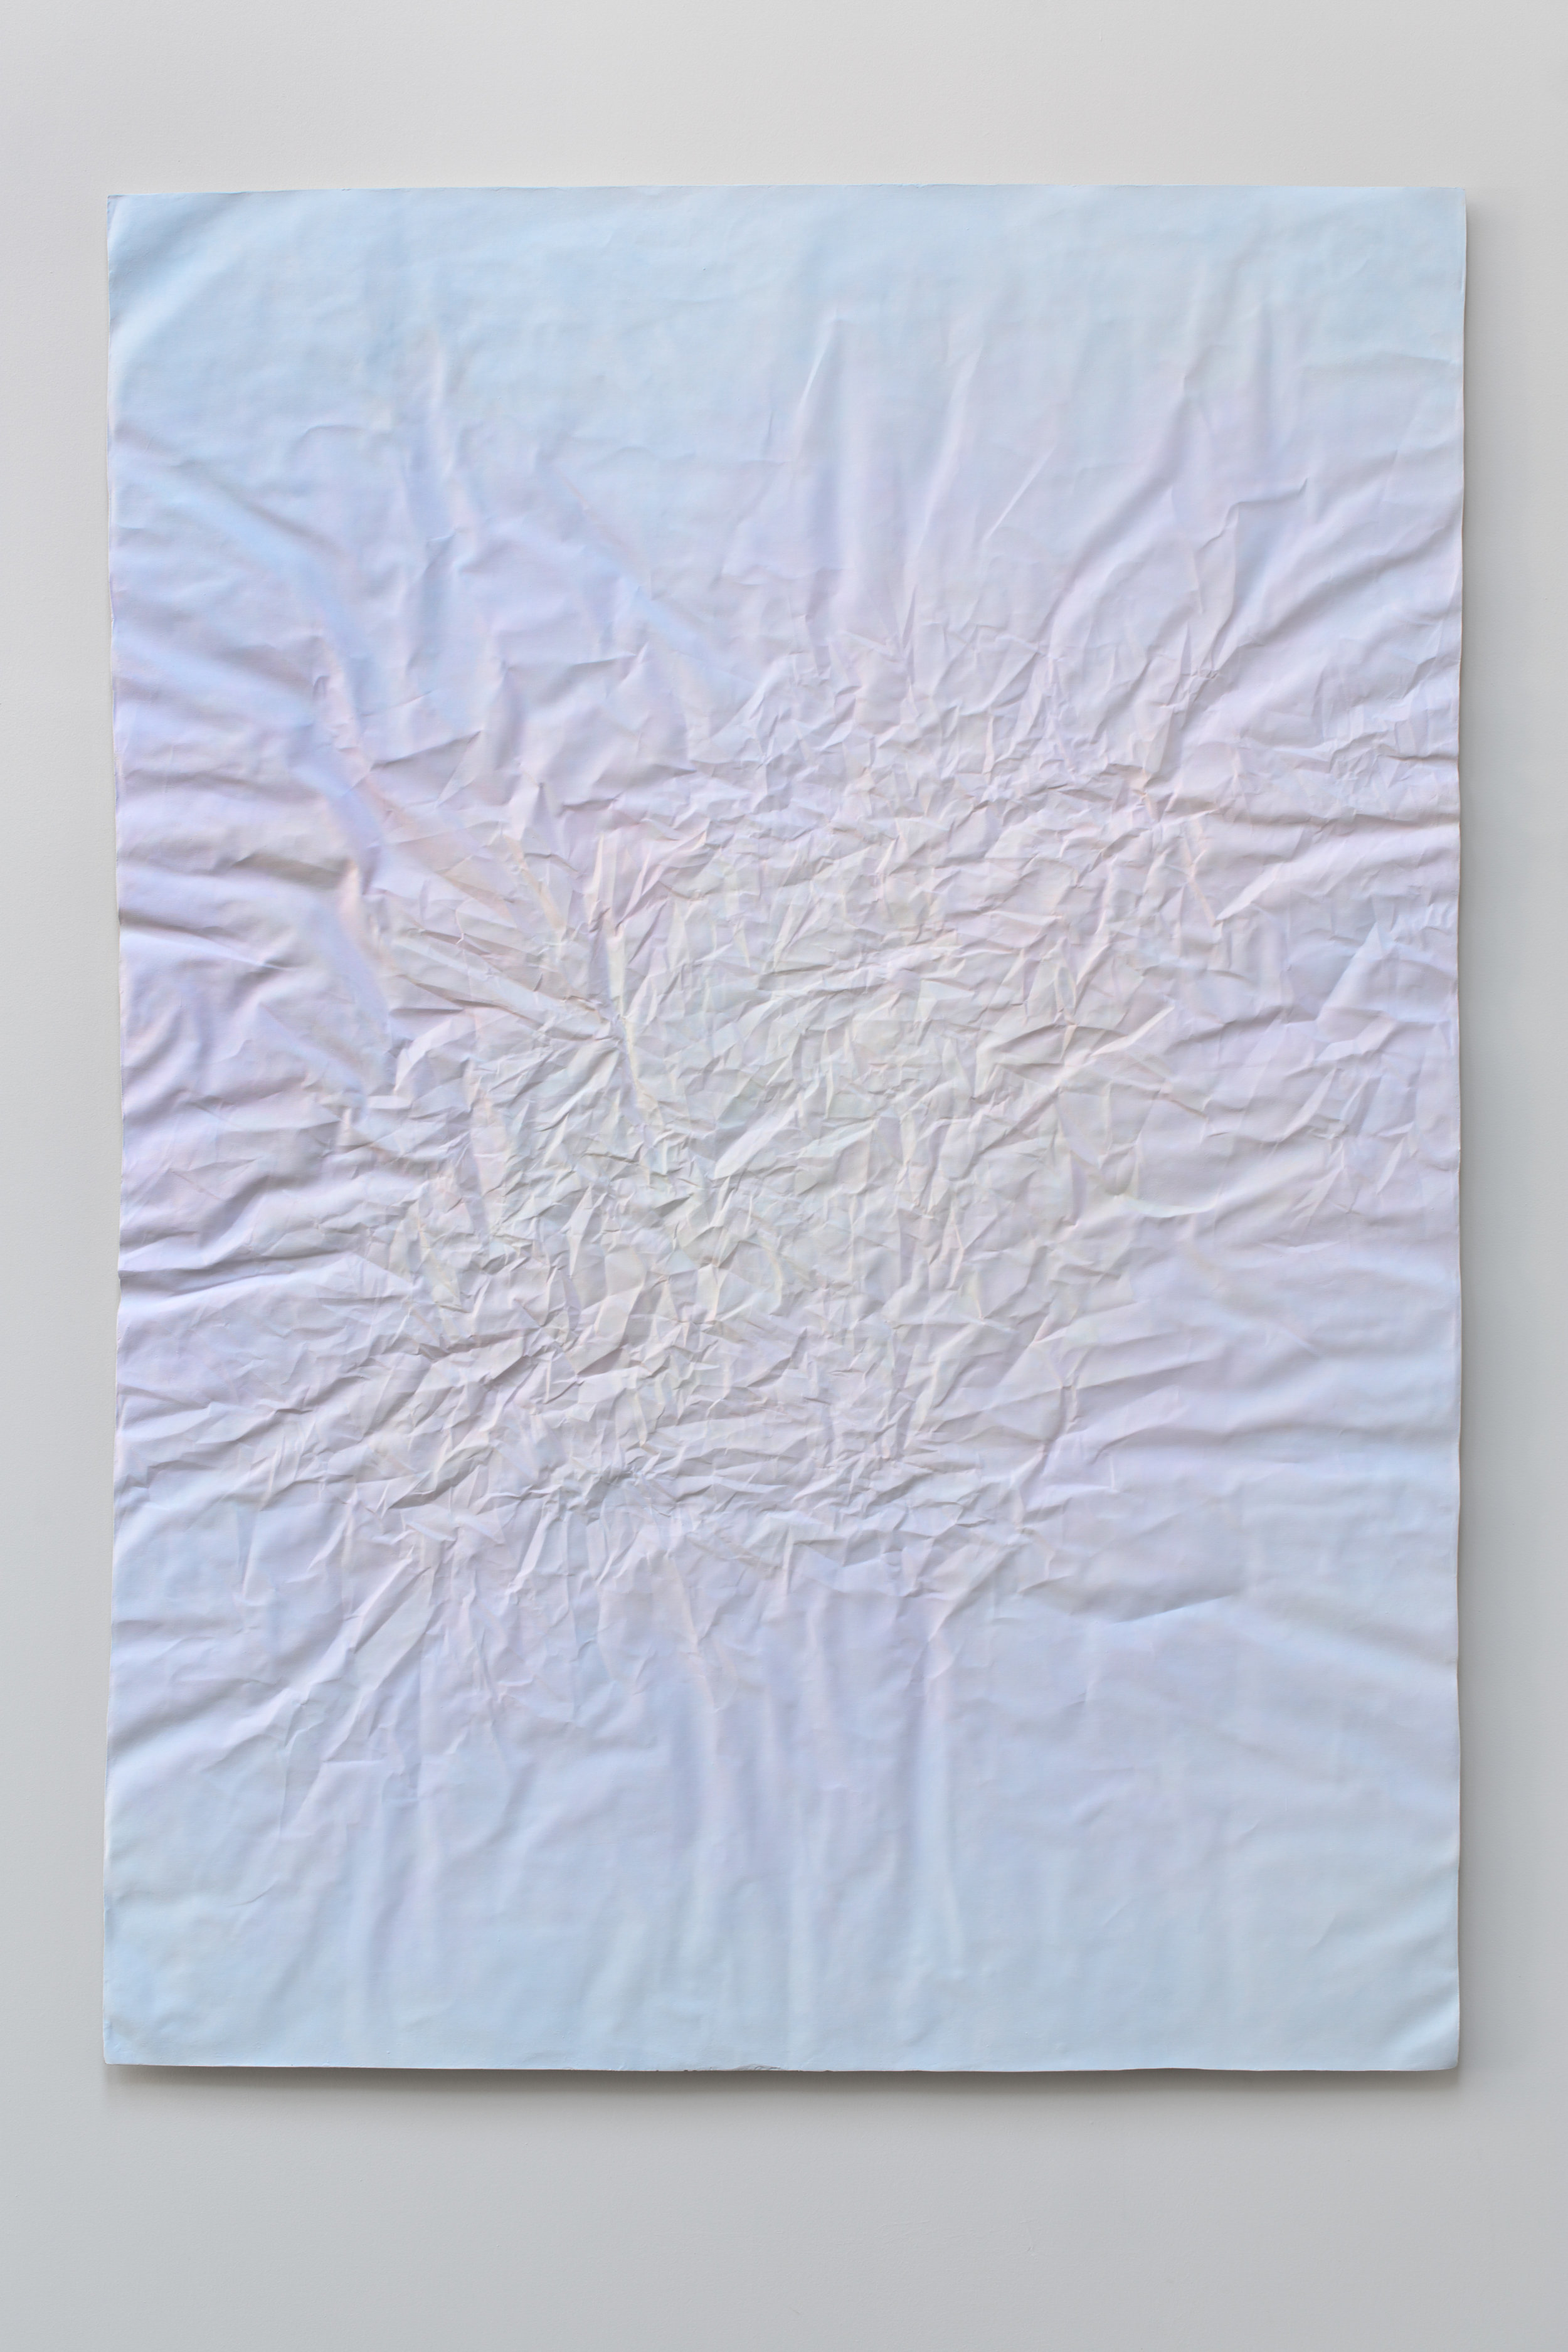  Jiří Matějů,  White Surface (First Meeting Place, Second Meeting Place) , 2015, mixed media and pigments on canvas, 220 x 160 cm 